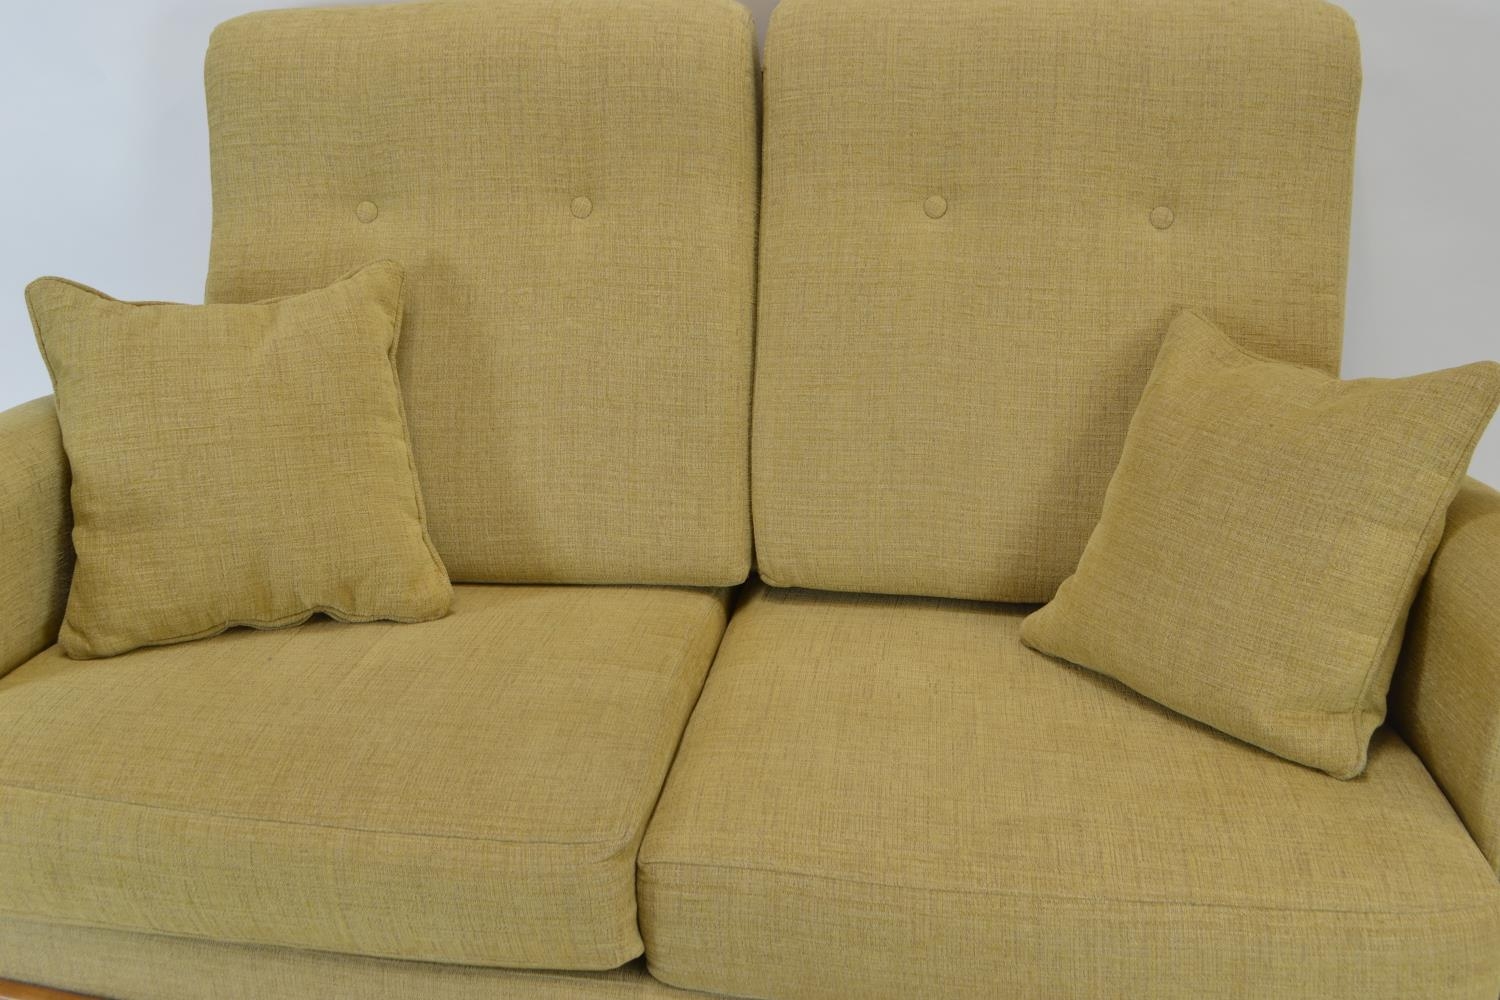 Elm framed two seater Ercol sofa in natural finish h90cm x w144cm x d70cm  - Image 3 of 4